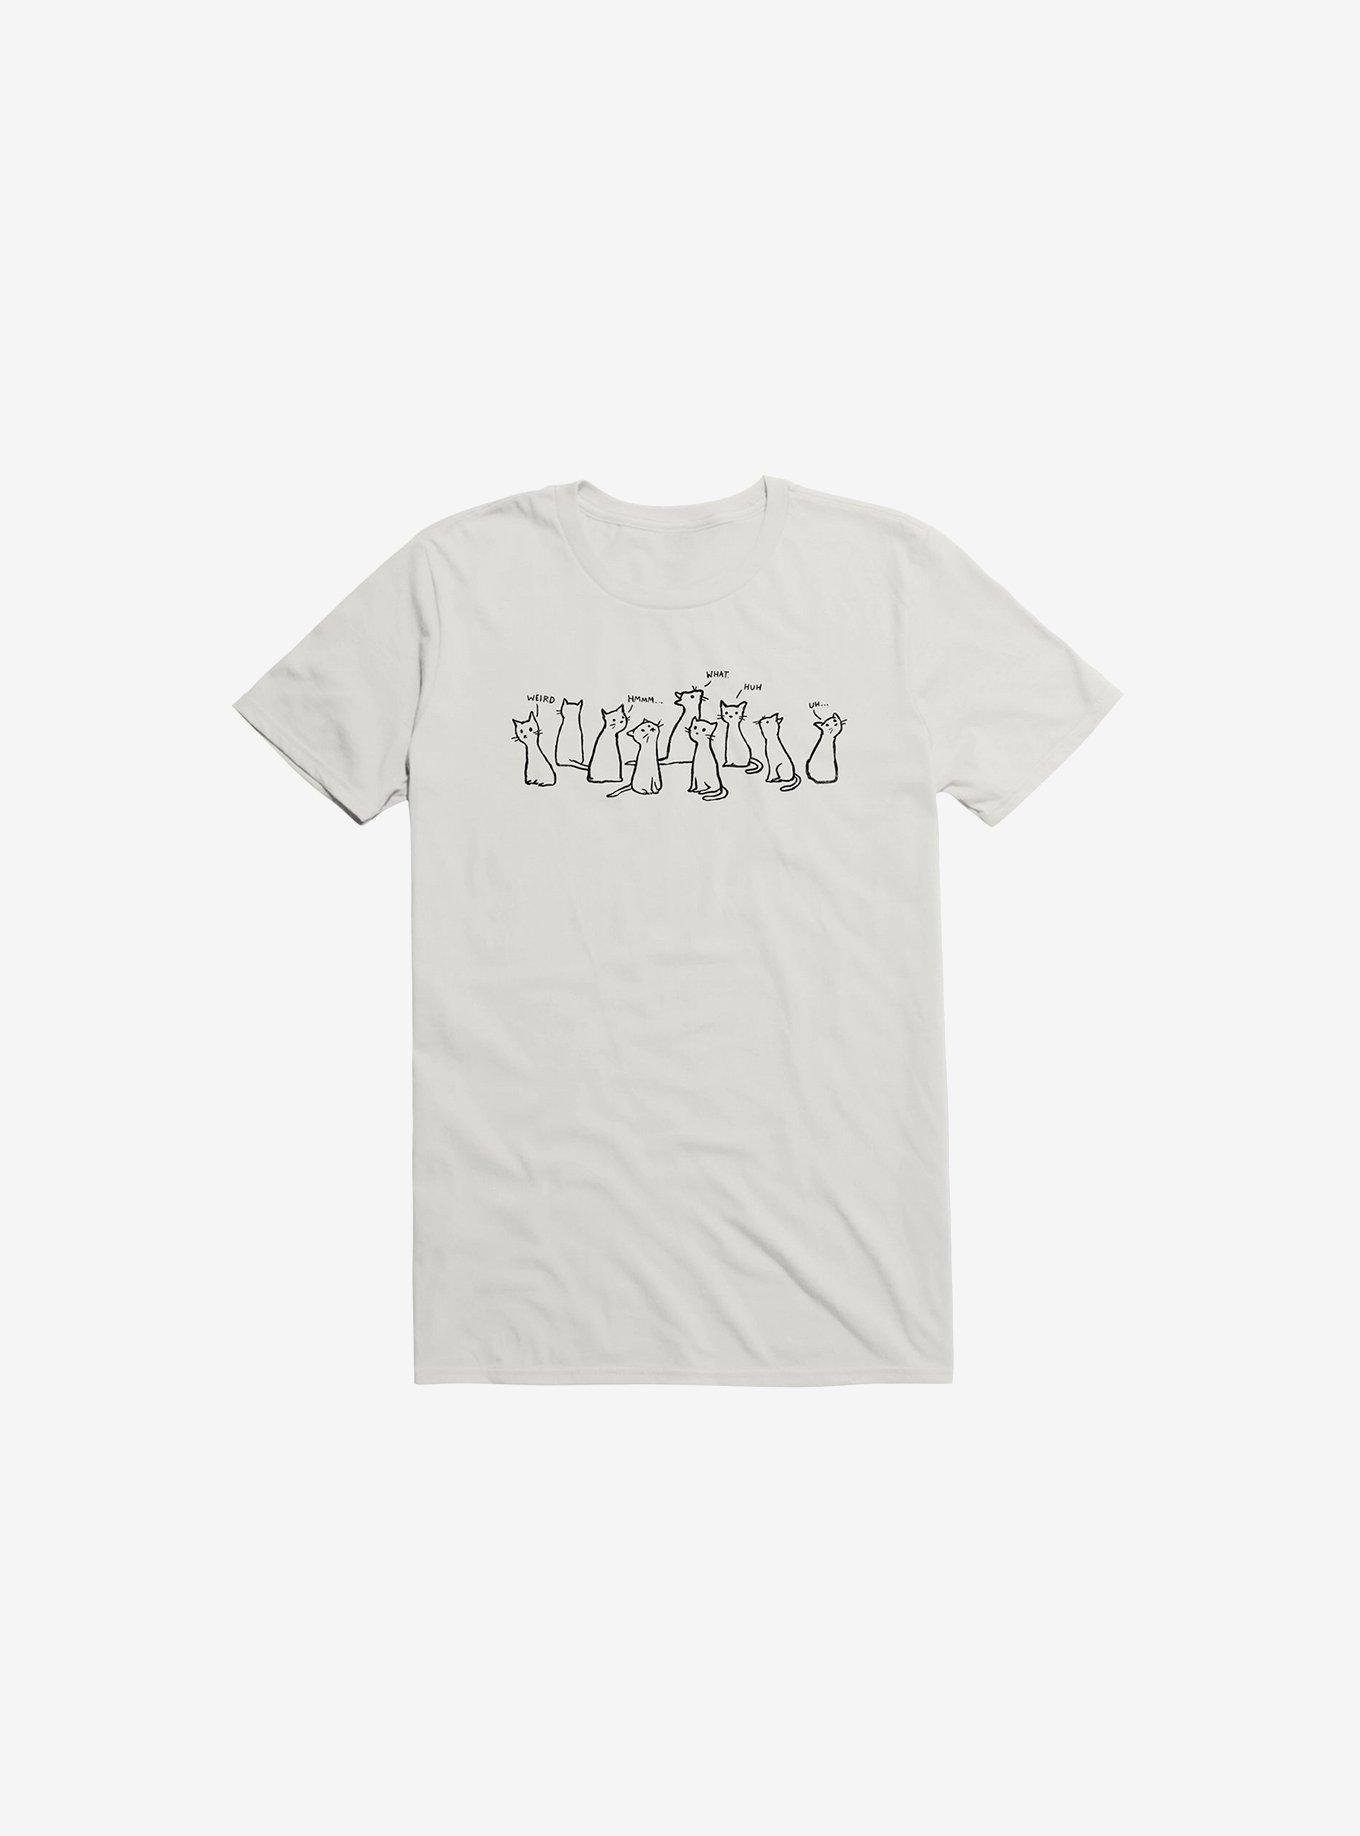 Confused Bunch T-Shirt, WHITE, hi-res